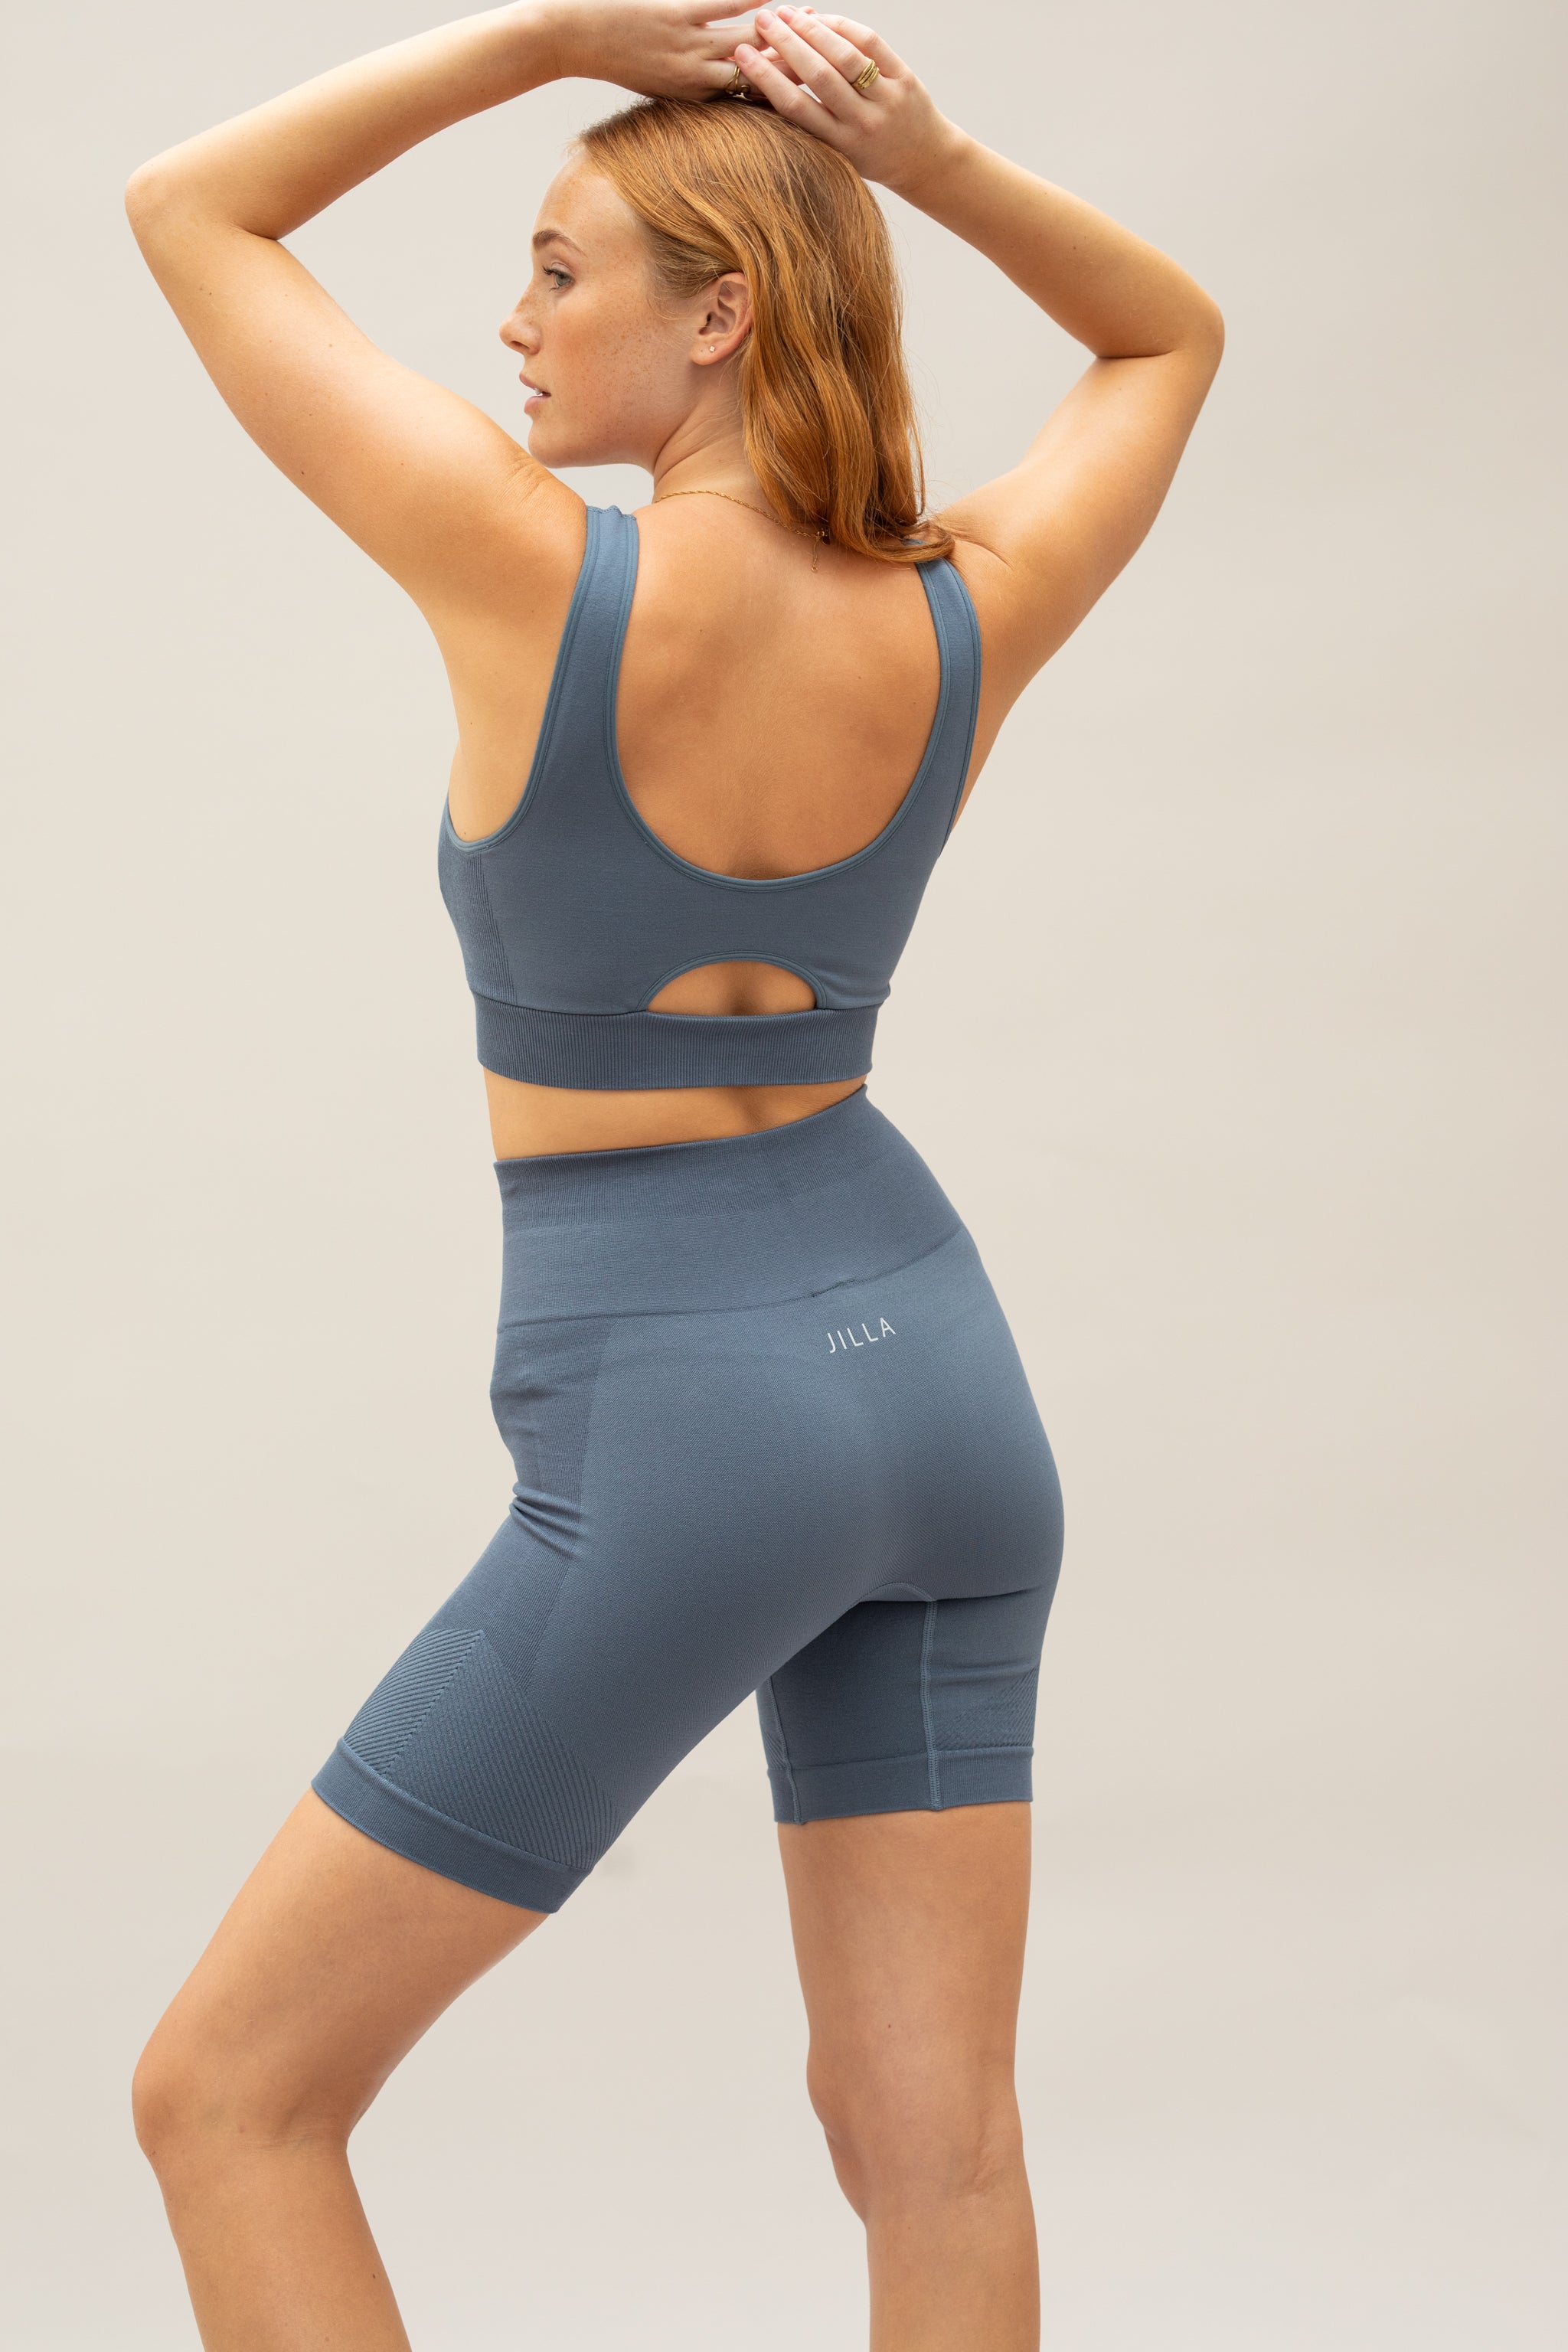 Model wearing blue supportive sports bra and blue yoga shorts for sustainable activewear brand Jilla